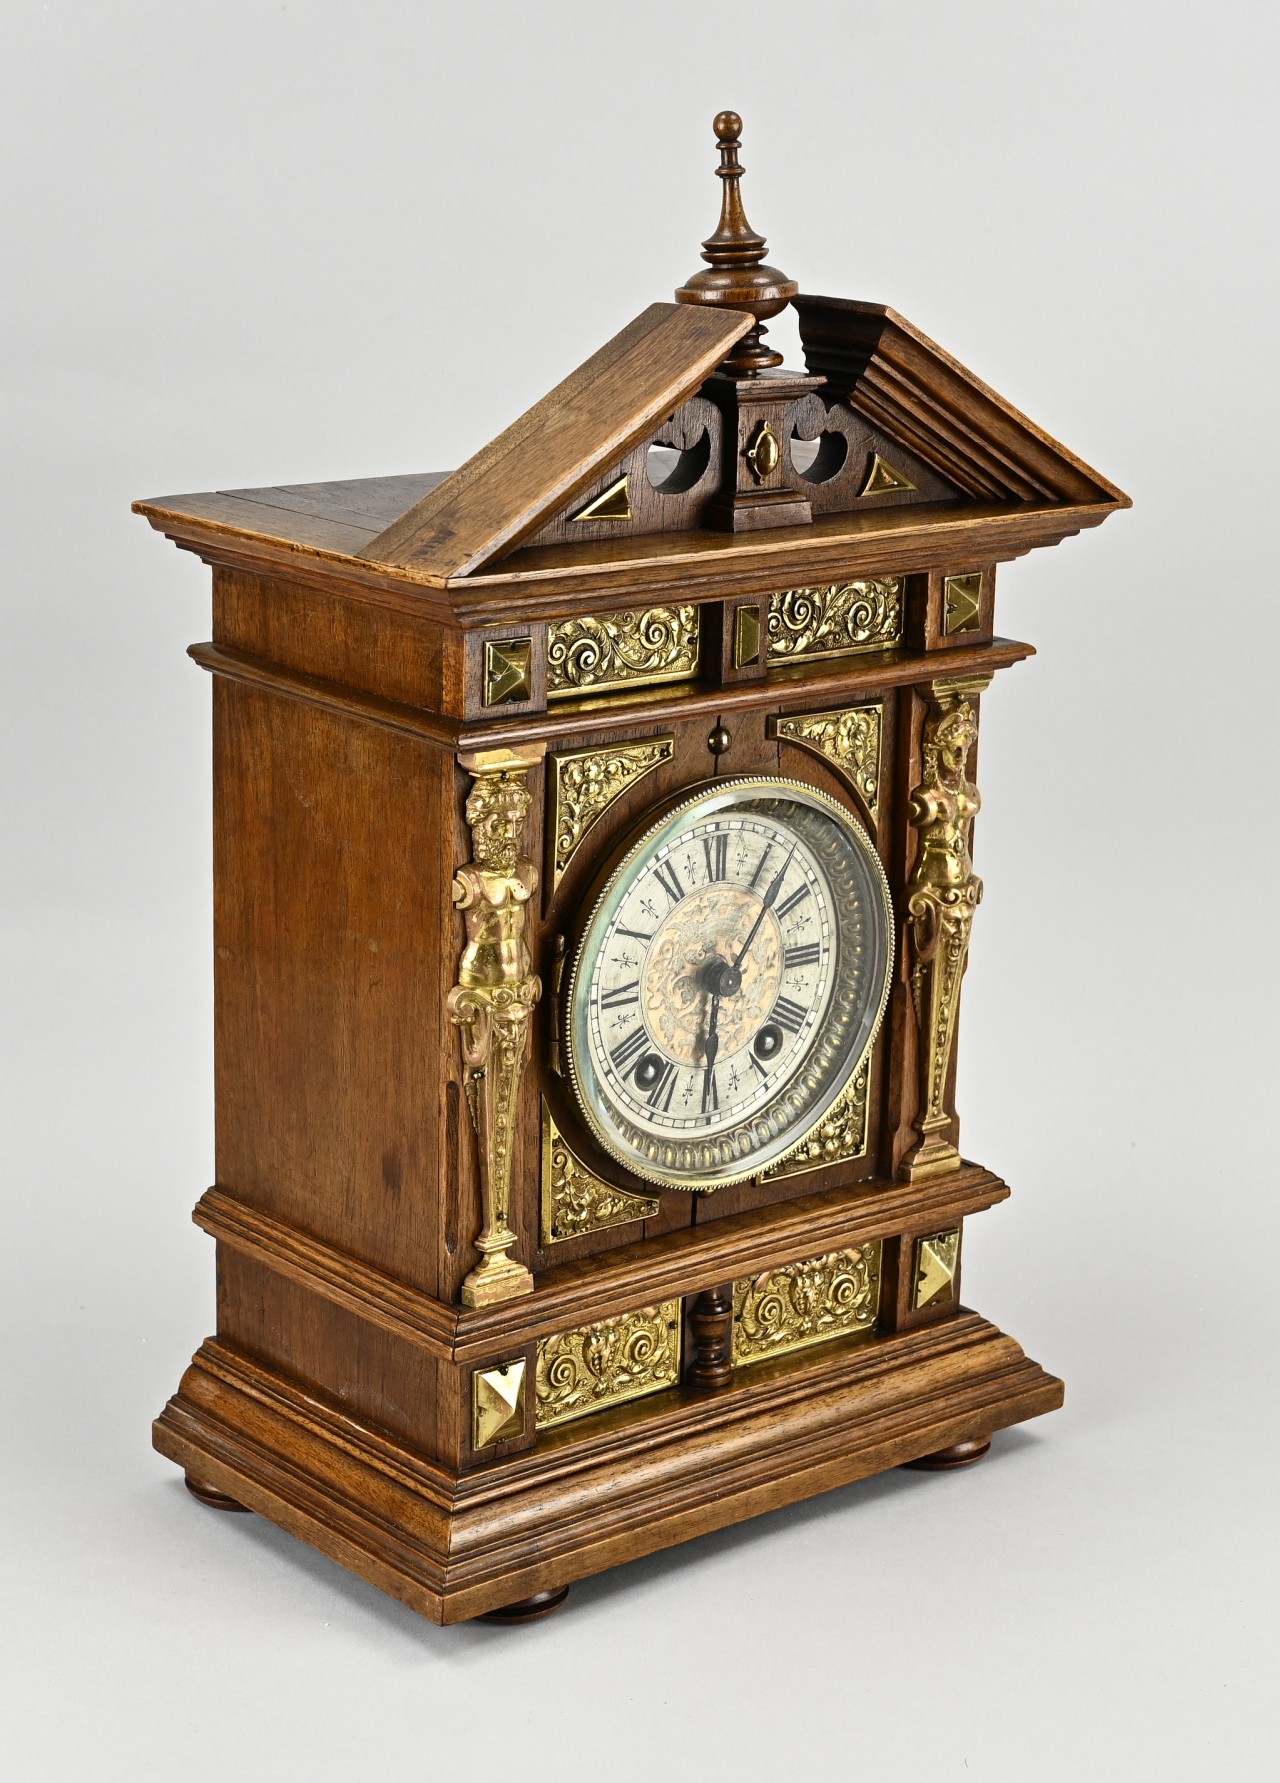 Lenzkirch table clock - Image 2 of 2